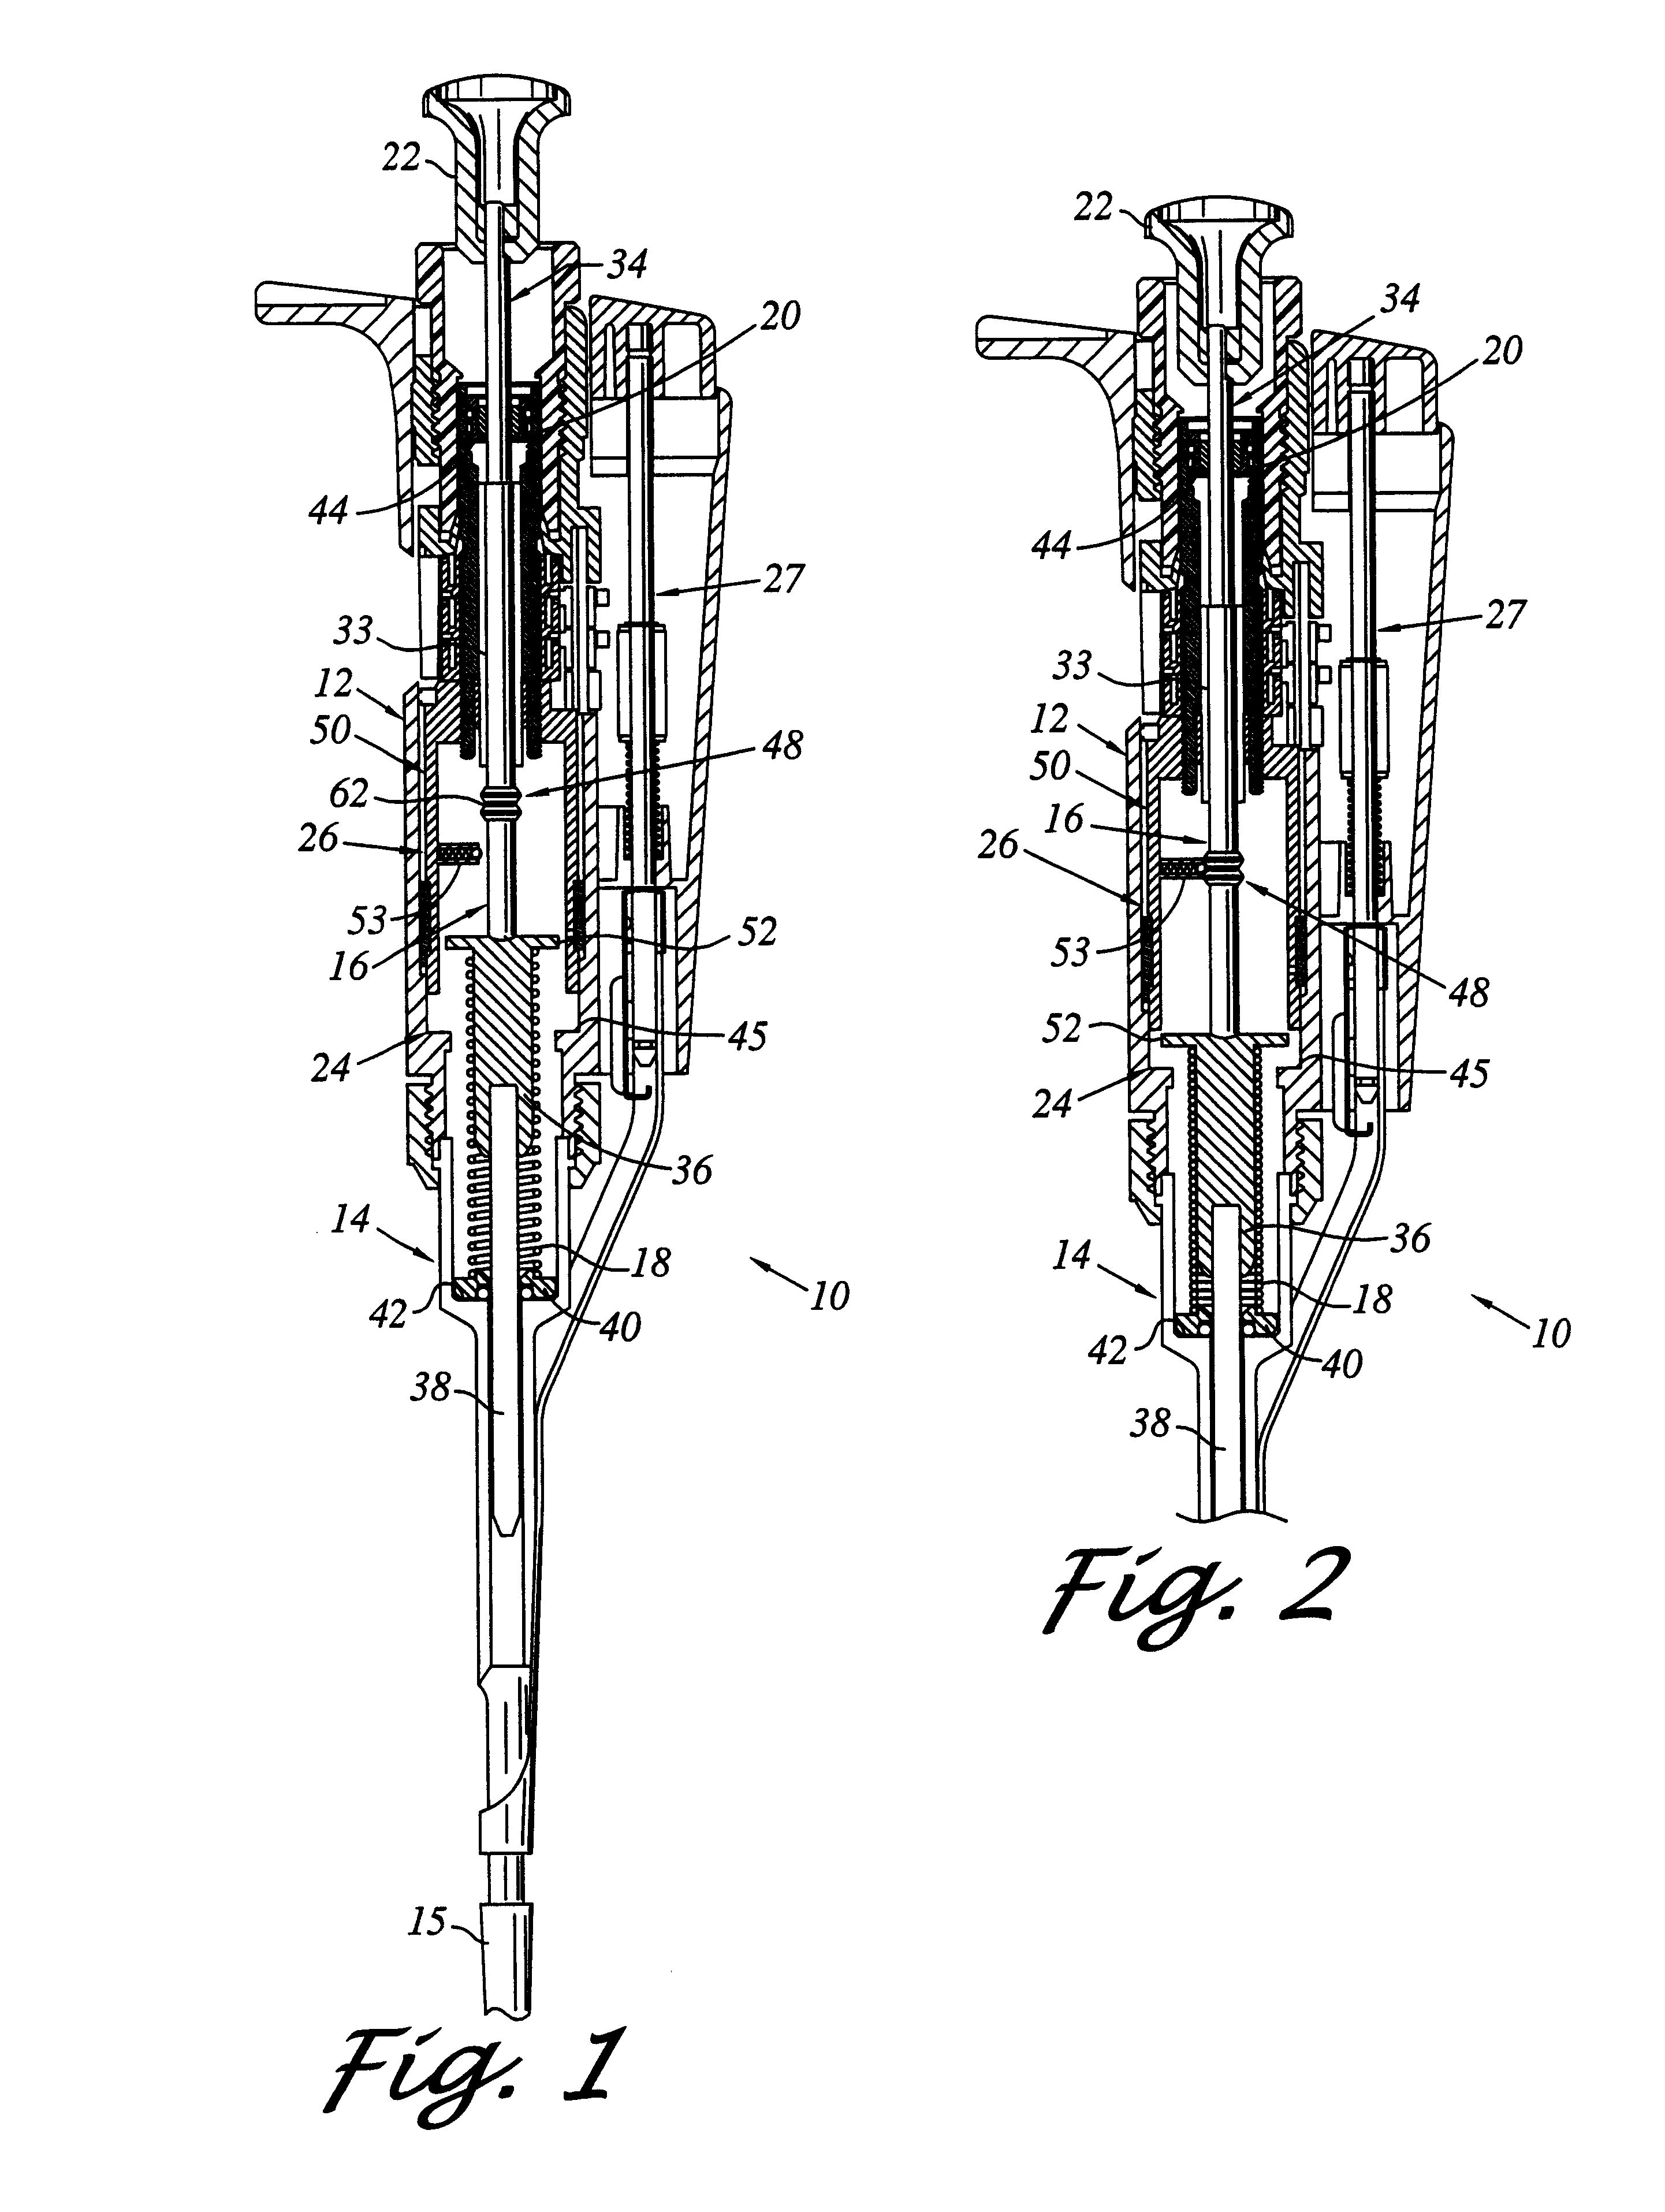 Blowout springless manual air displacement pipette with mechanical assist for aiding in locating and maintaining pipette plunger at a home position